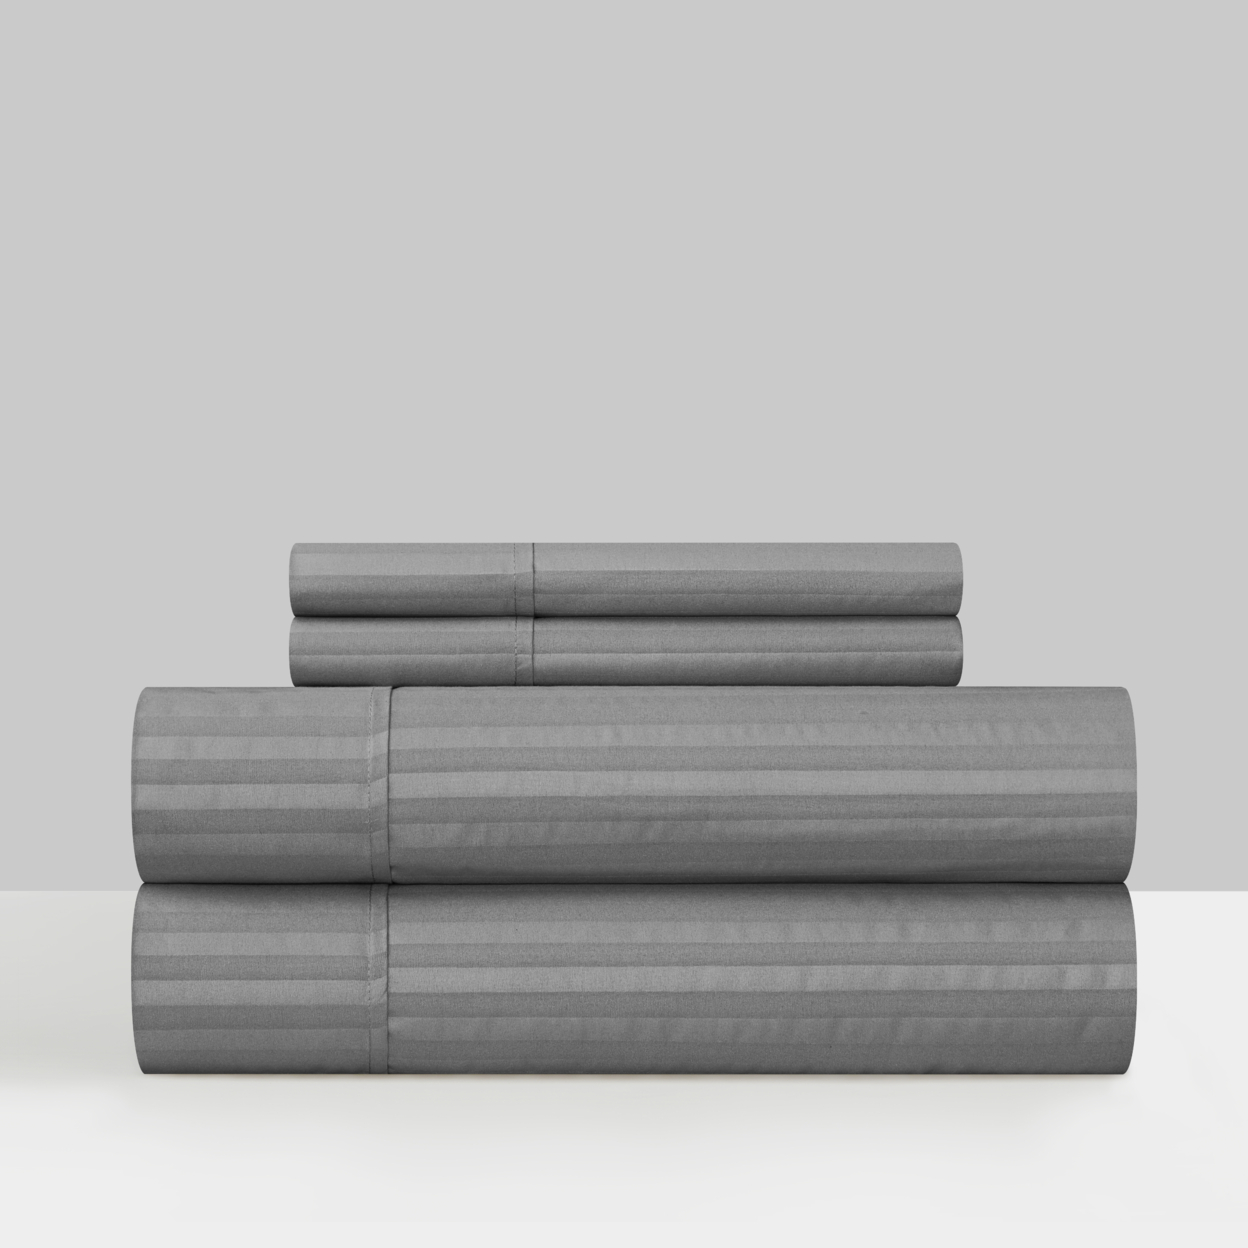 Shina 3 Or 4 Piece Sheet Set Solid Color Striped Pattern Technique - Grey, Queen